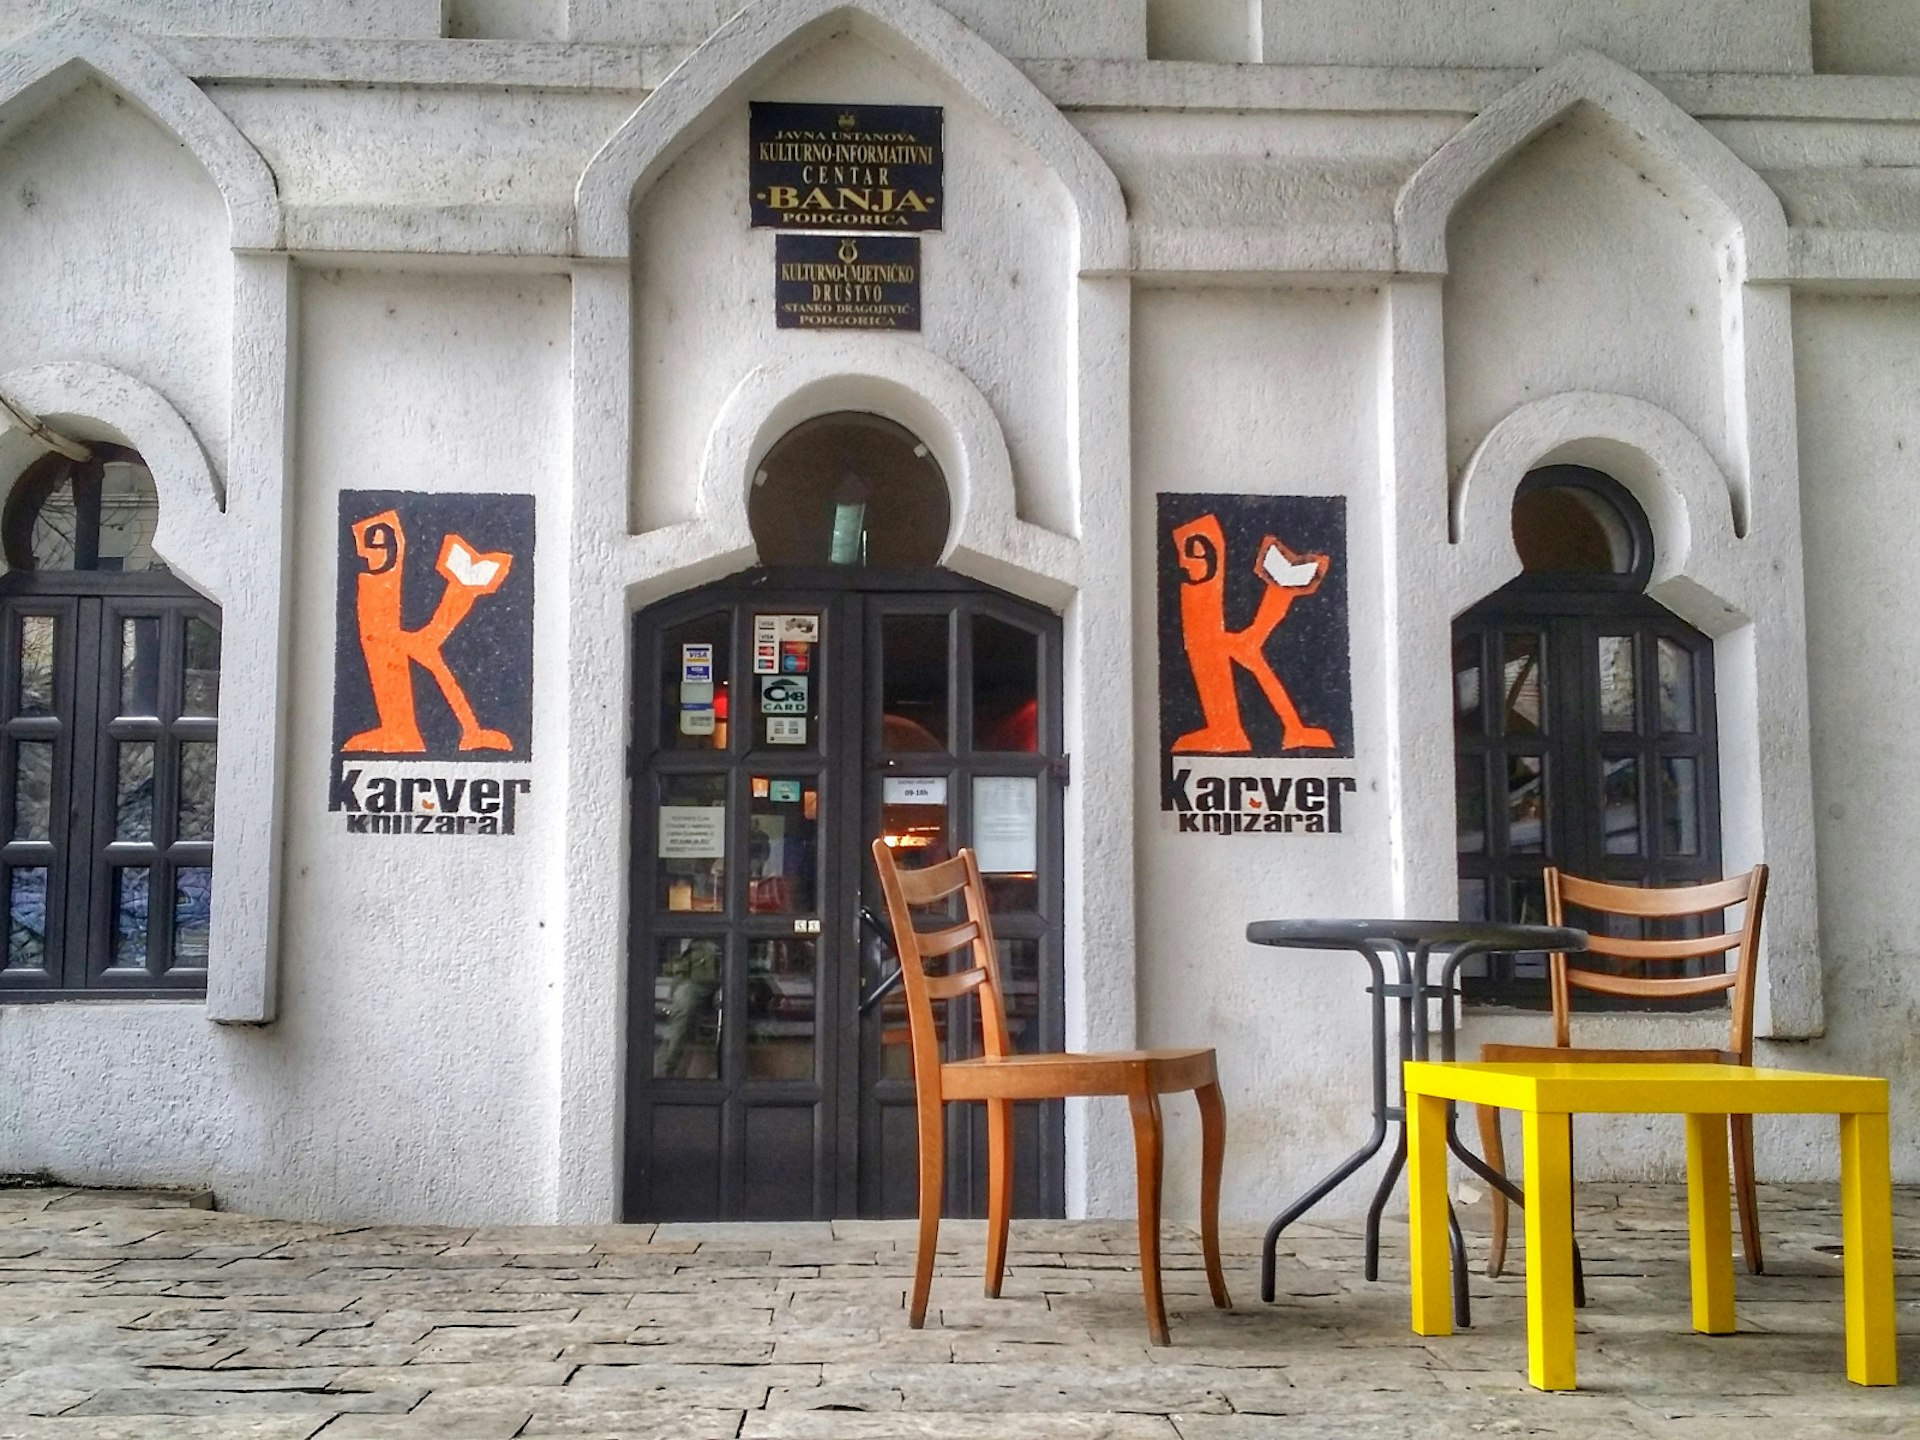 Karver bookstore-café, housed in the old Turkish bath © Mladen Savkovic / Lonely Planet